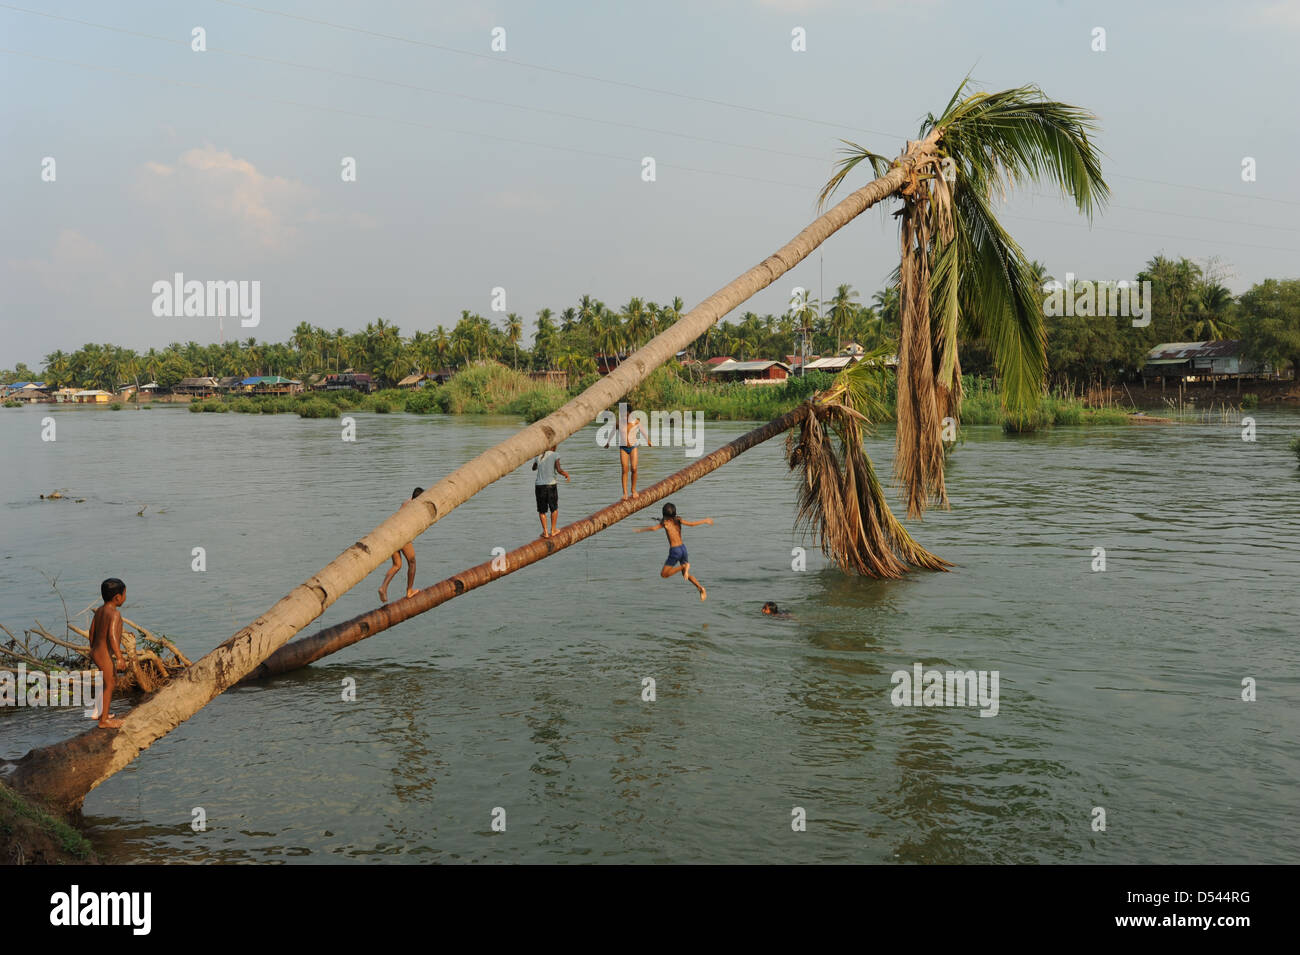 Children playing on river Mekong at Don Khon island on Laos Stock Photo